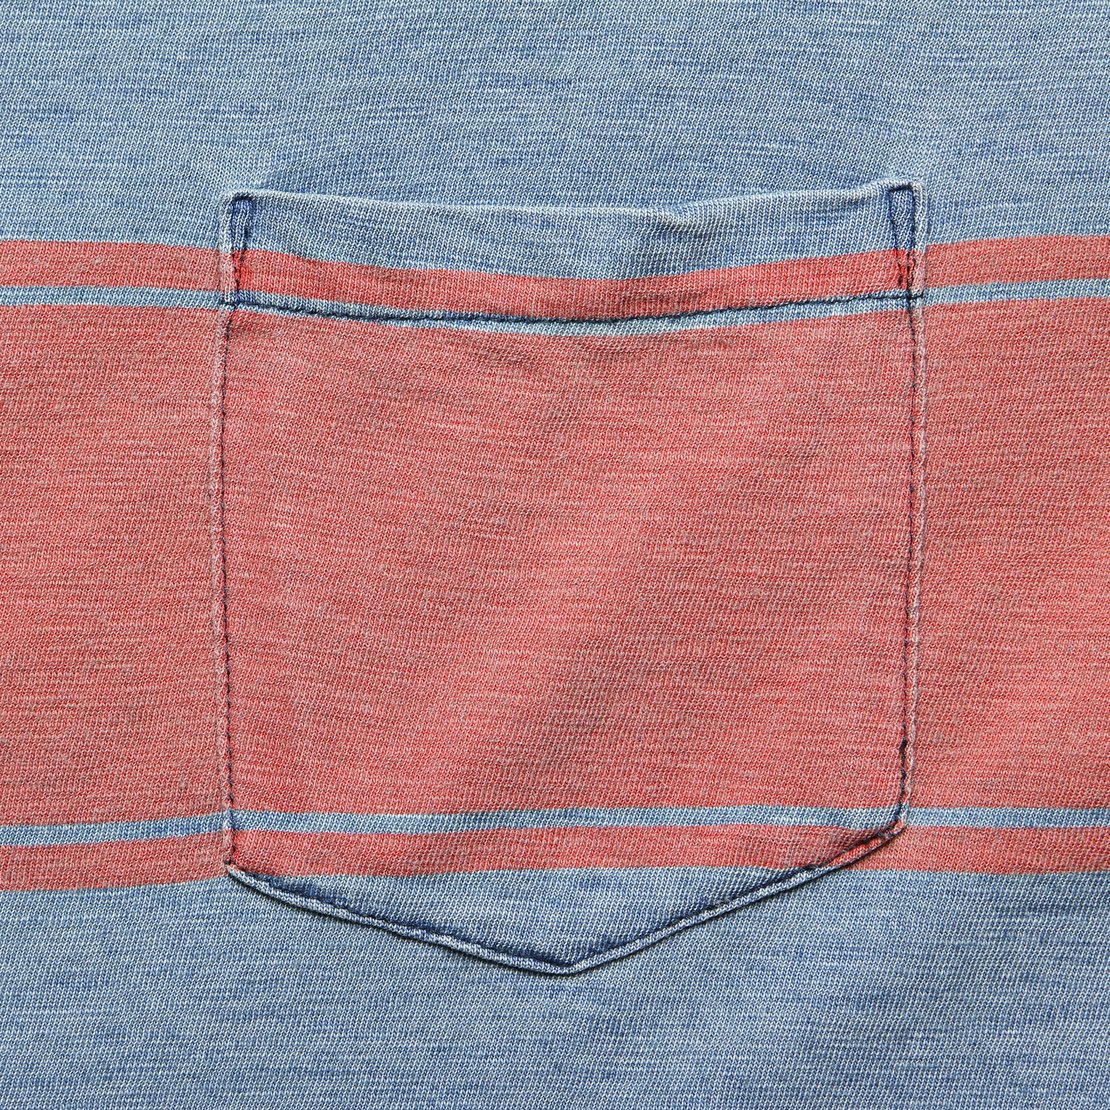 Surf Stripe Pocket Tee - Vintage Blue - Faherty - STAG Provisions - Tops - S/S Tee